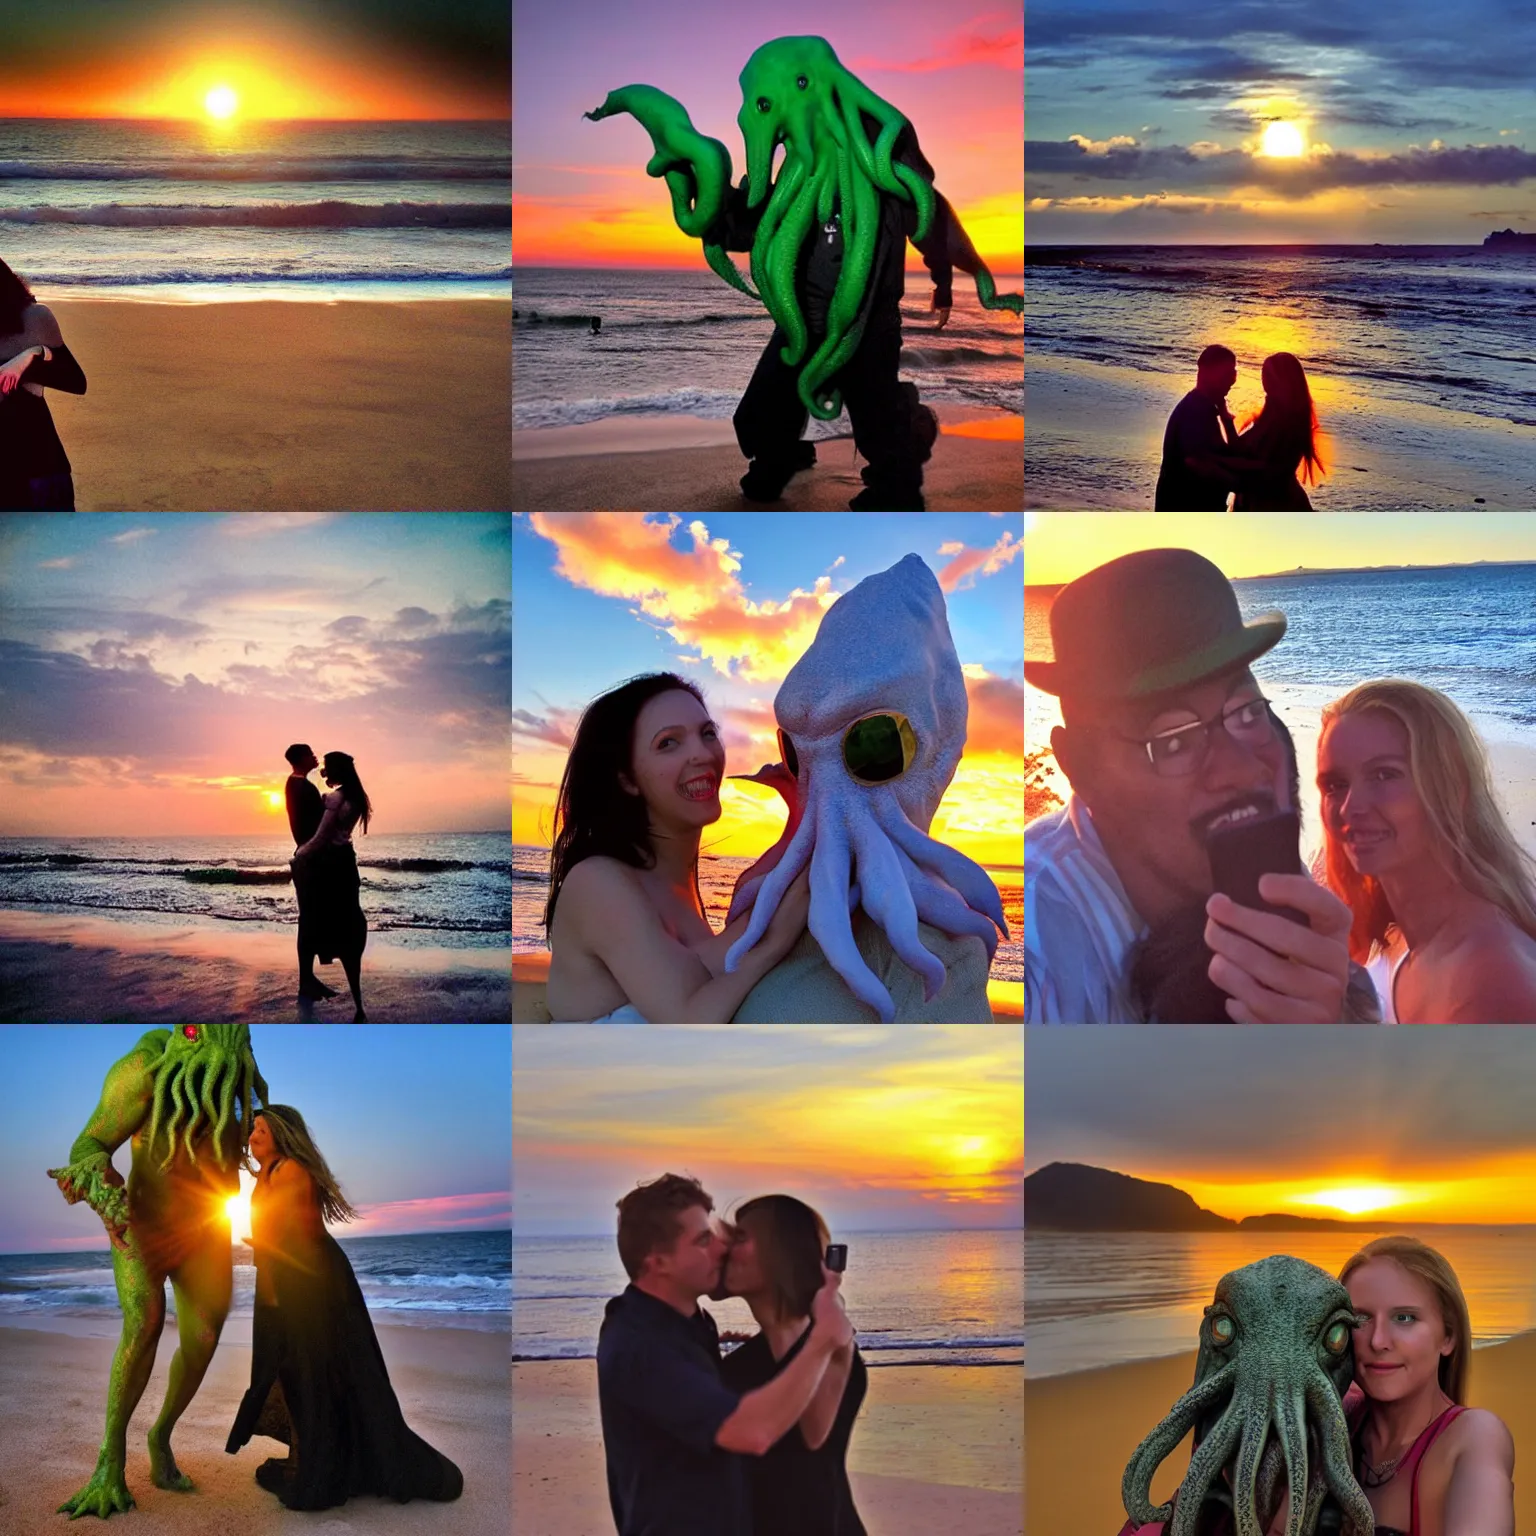 Image similar to Cthulhu photobombing a romantic selfie on a beach at sunset